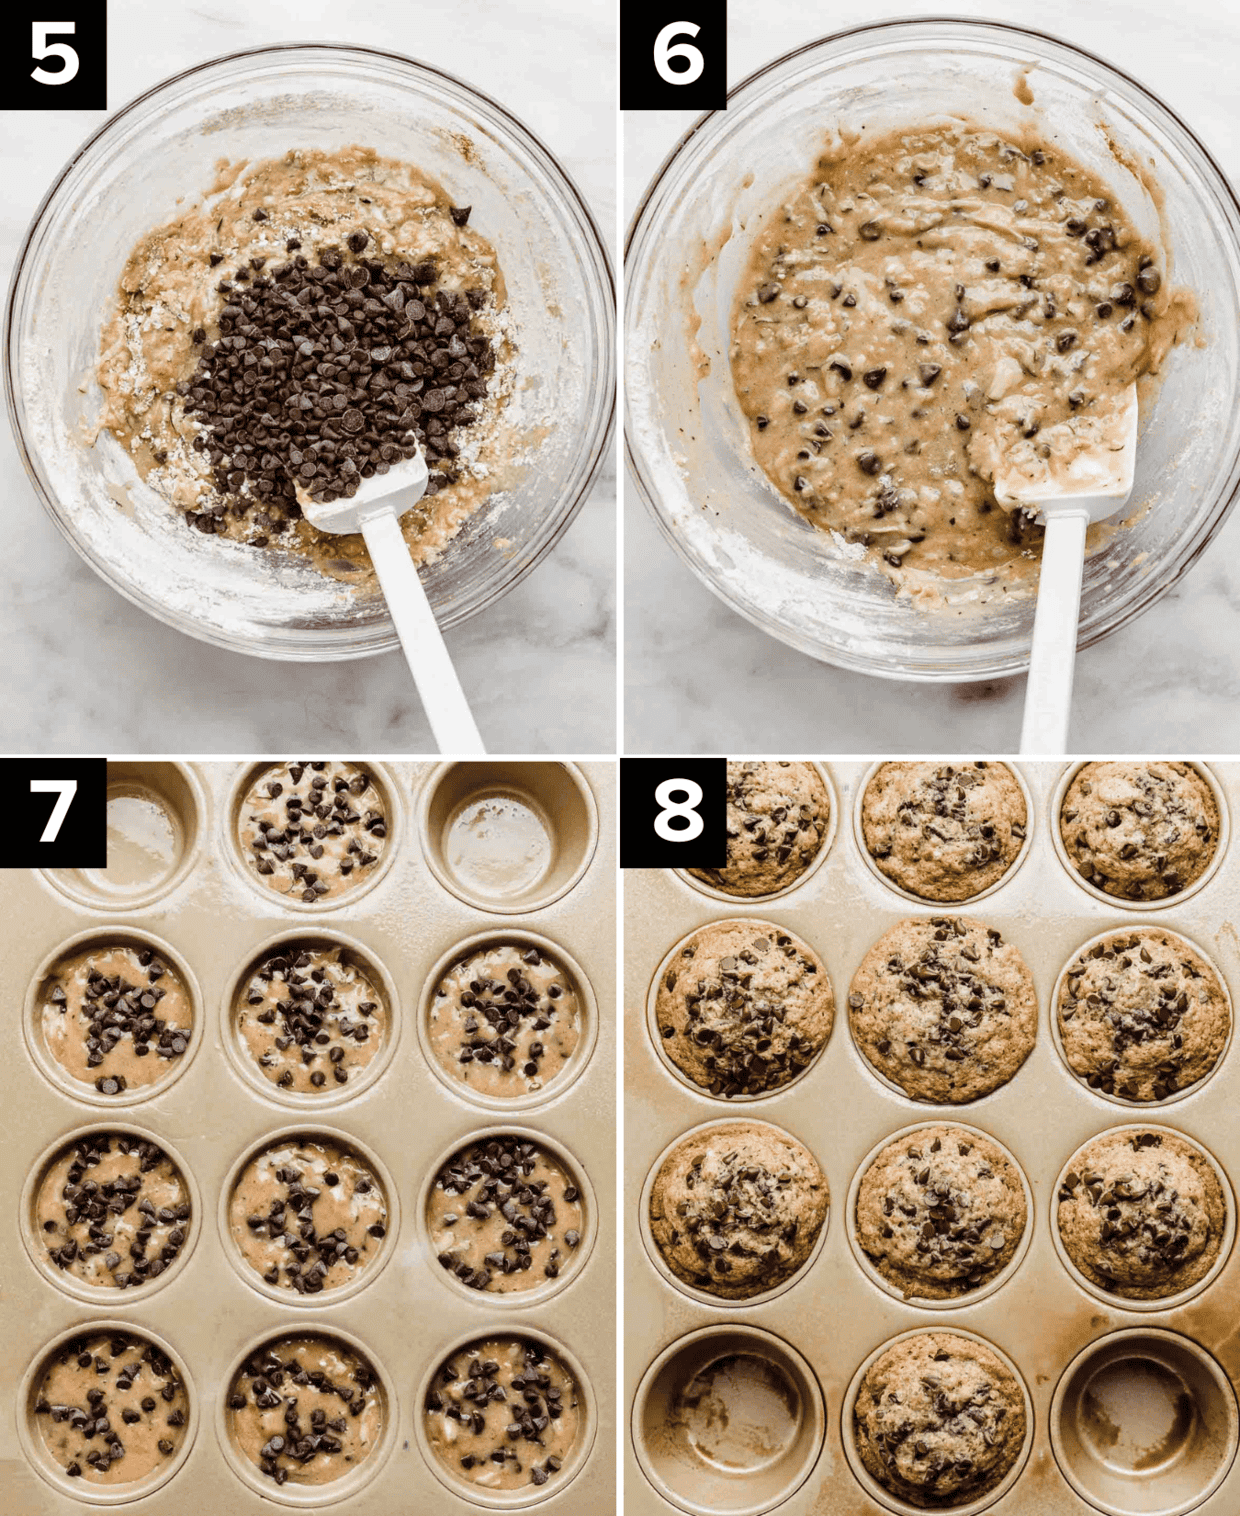 Four images showing how to make Zucchini Chocolate Chip Muffins, top left is chocolate chips in a glass bowl over zucchini muffin batter, top right image is Zucchini Chocolate Chip Muffin batter in glass bowl, bottom left image is Zucchini Chocolate Chip Muffin batter in muffin pan, bottom right image is baked Zucchini Chocolate Chip Muffins in a muffin pan.